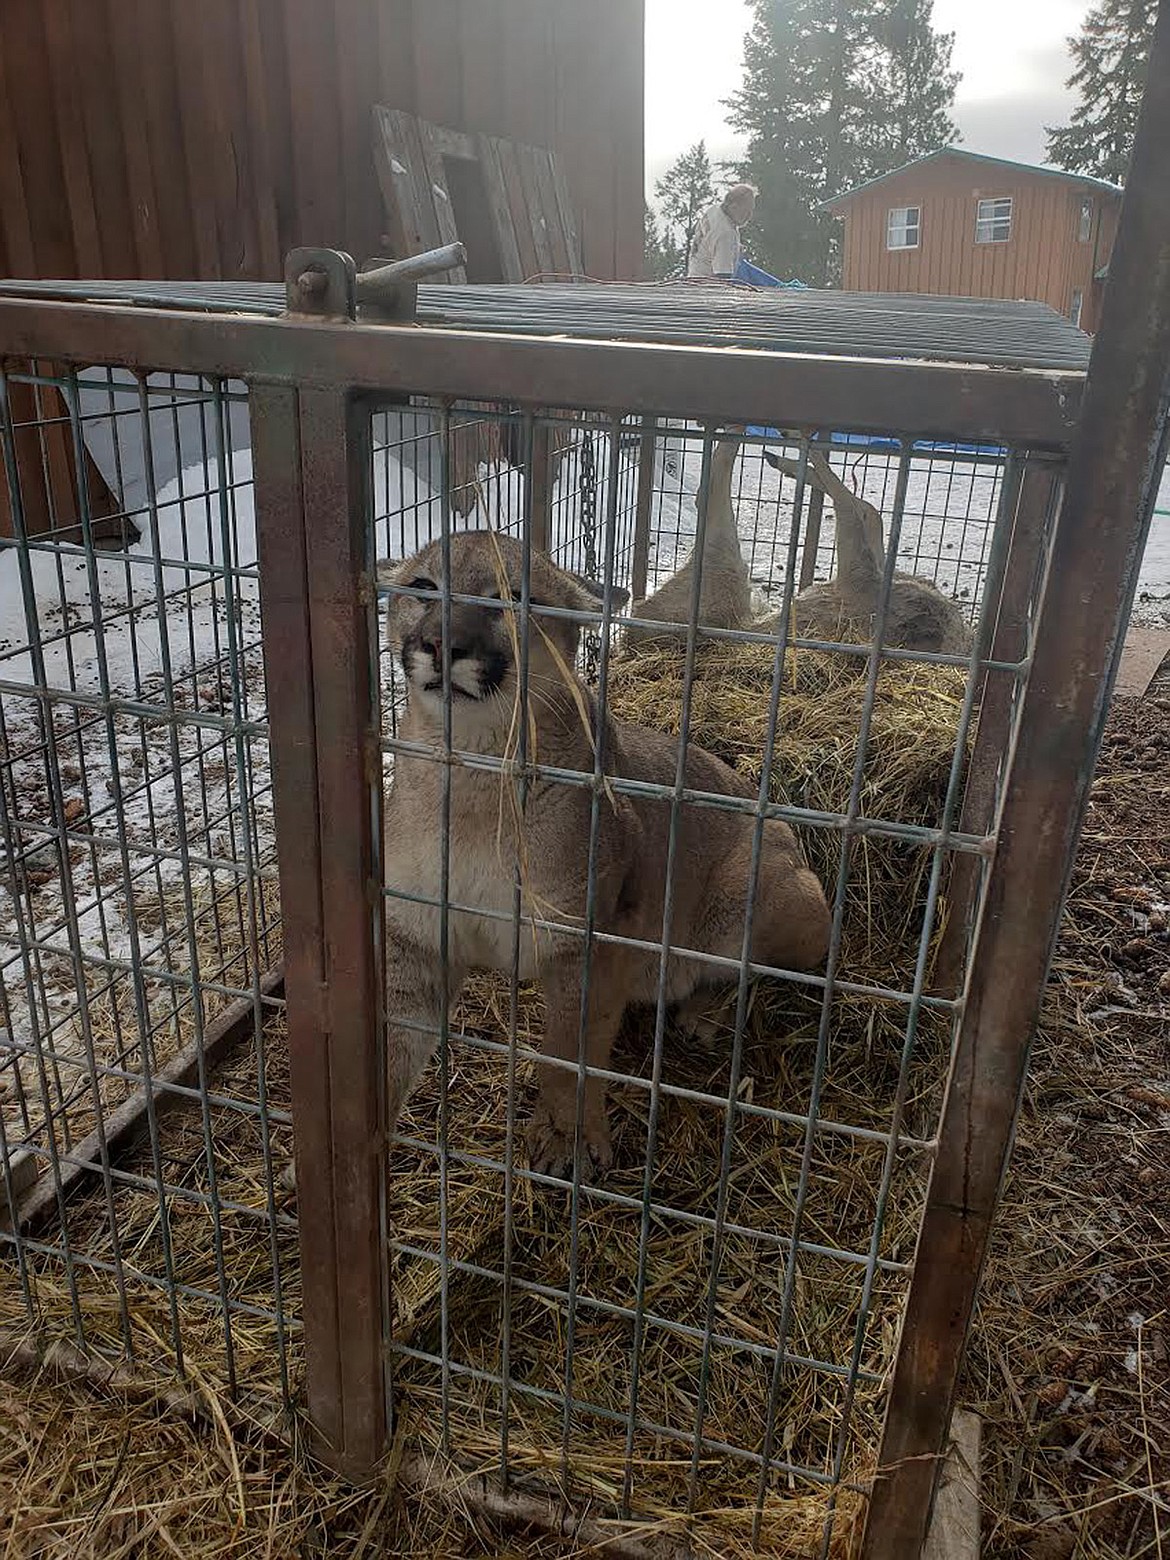 This mountain lion was euthanized after Montana Fish, Wildlife &amp; Parks officials determined it had become habituated to people. The lion was trapped at the residence of an Eureka woman Jan. 19. (Submitted photo)